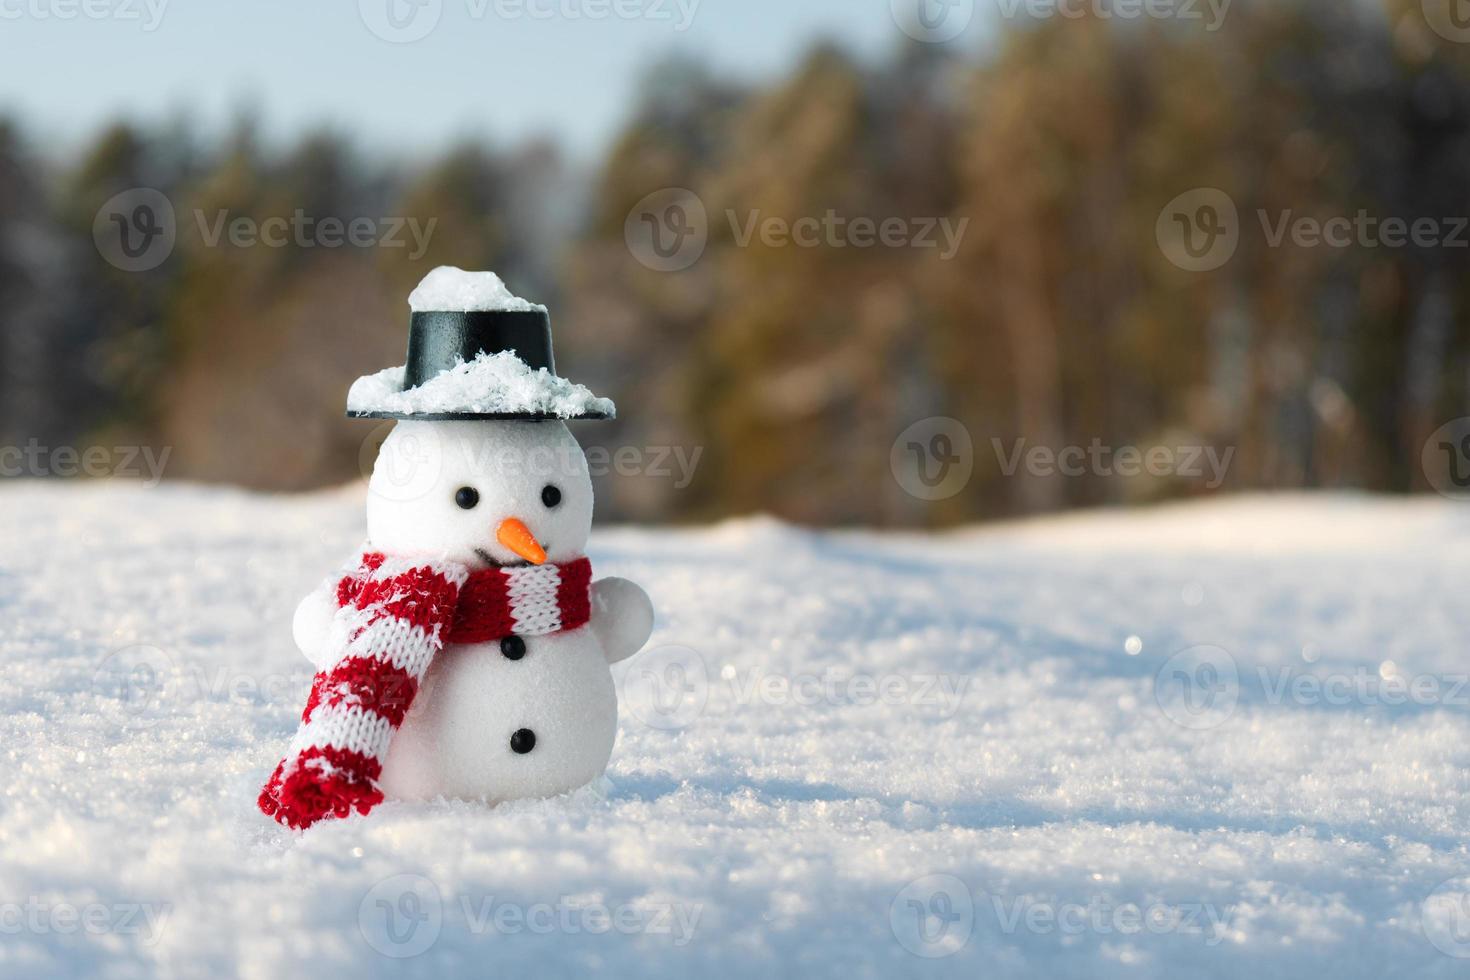 Doll of a Snowman stands in a snowdrift with pine forest on the background in sunny morning photo